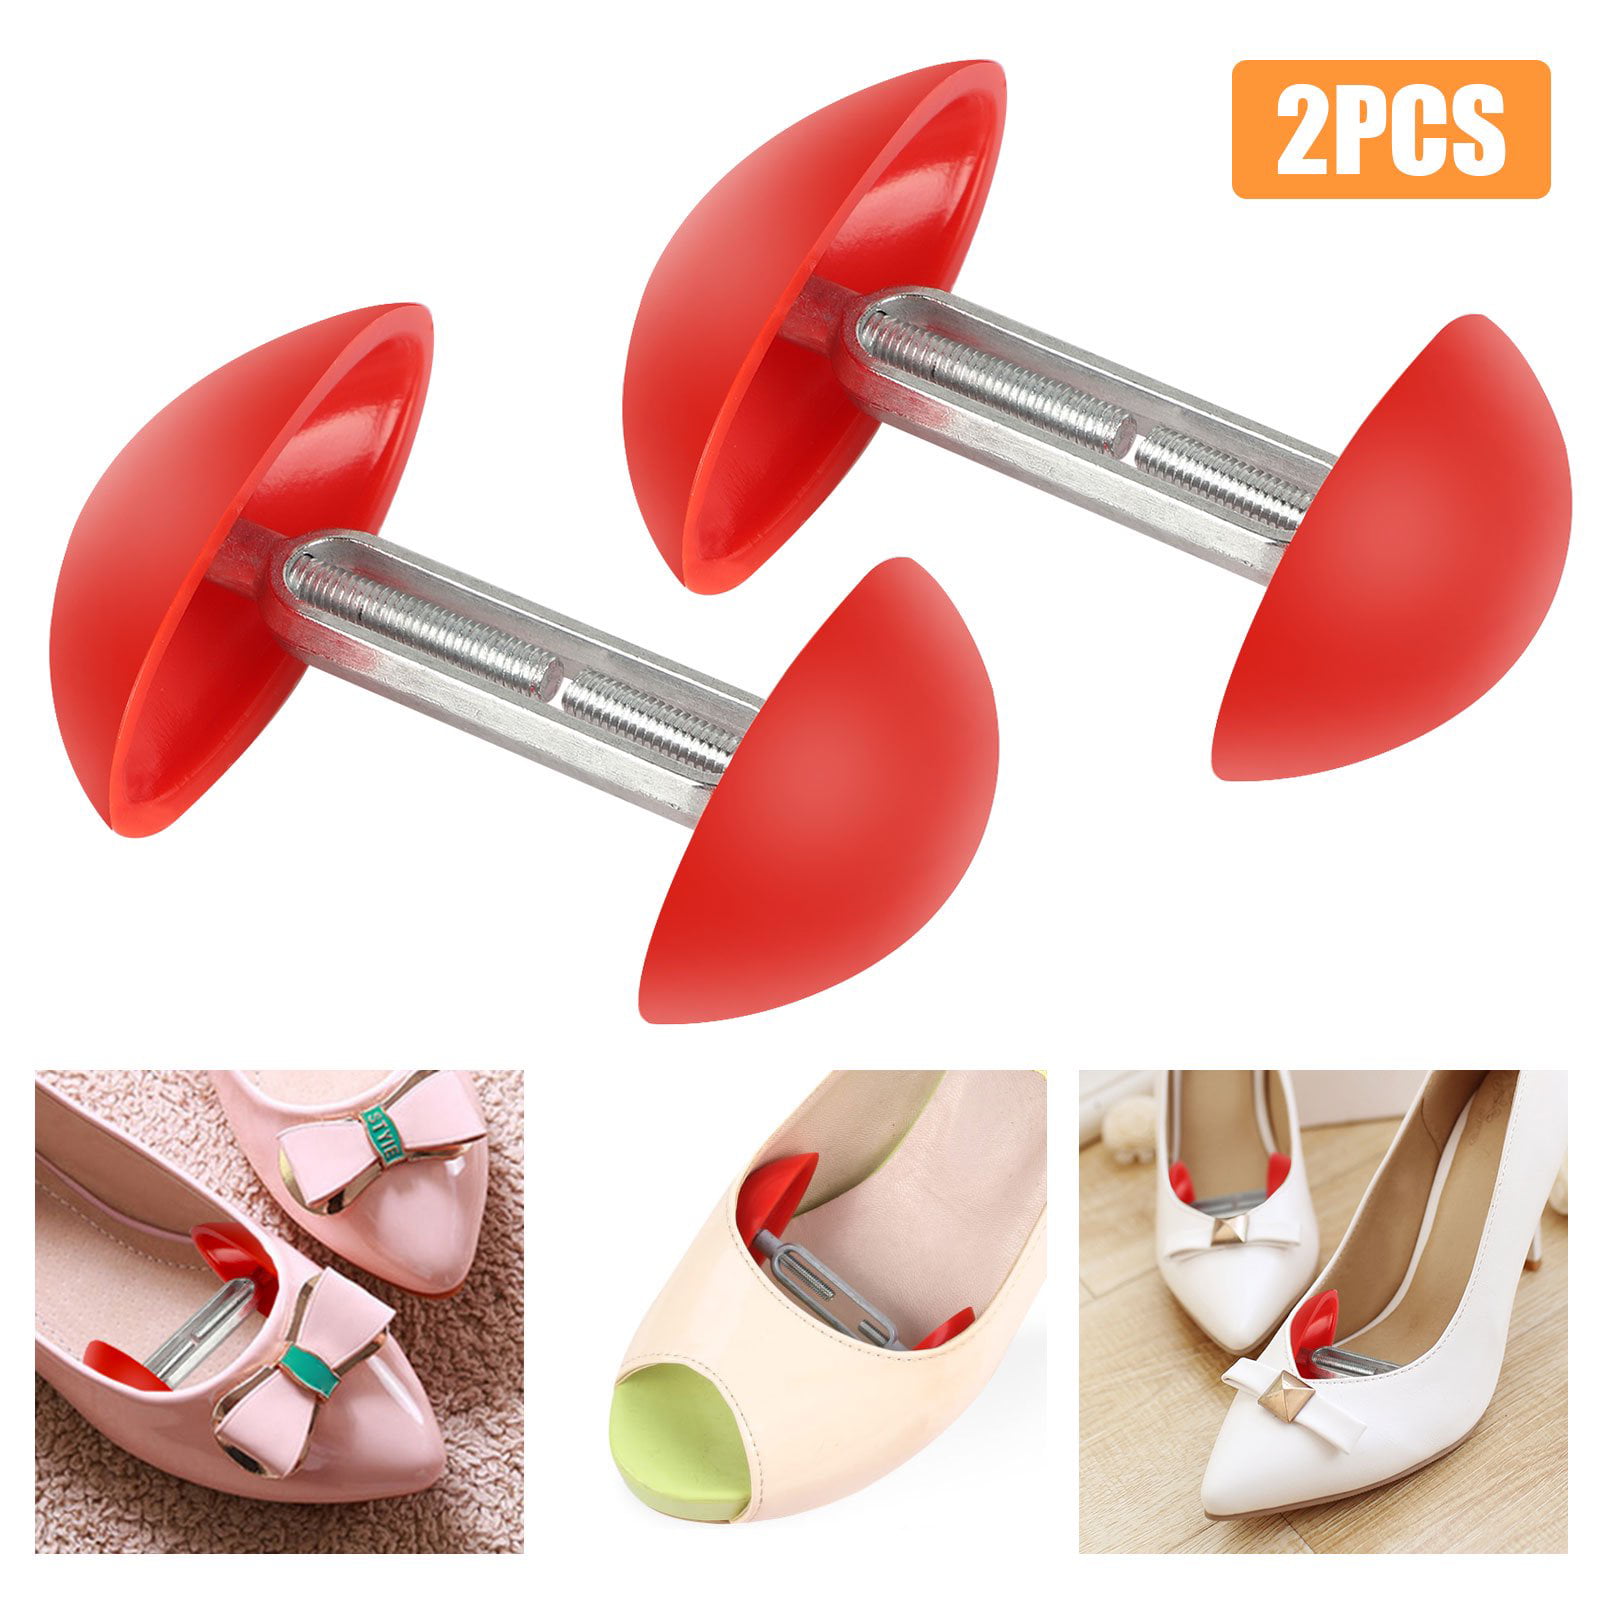 ICYANG 2Pair Portable Mini Shoes Stretchers Keeper Width Extender Adjustable Aid Shoe Trees For Men Women